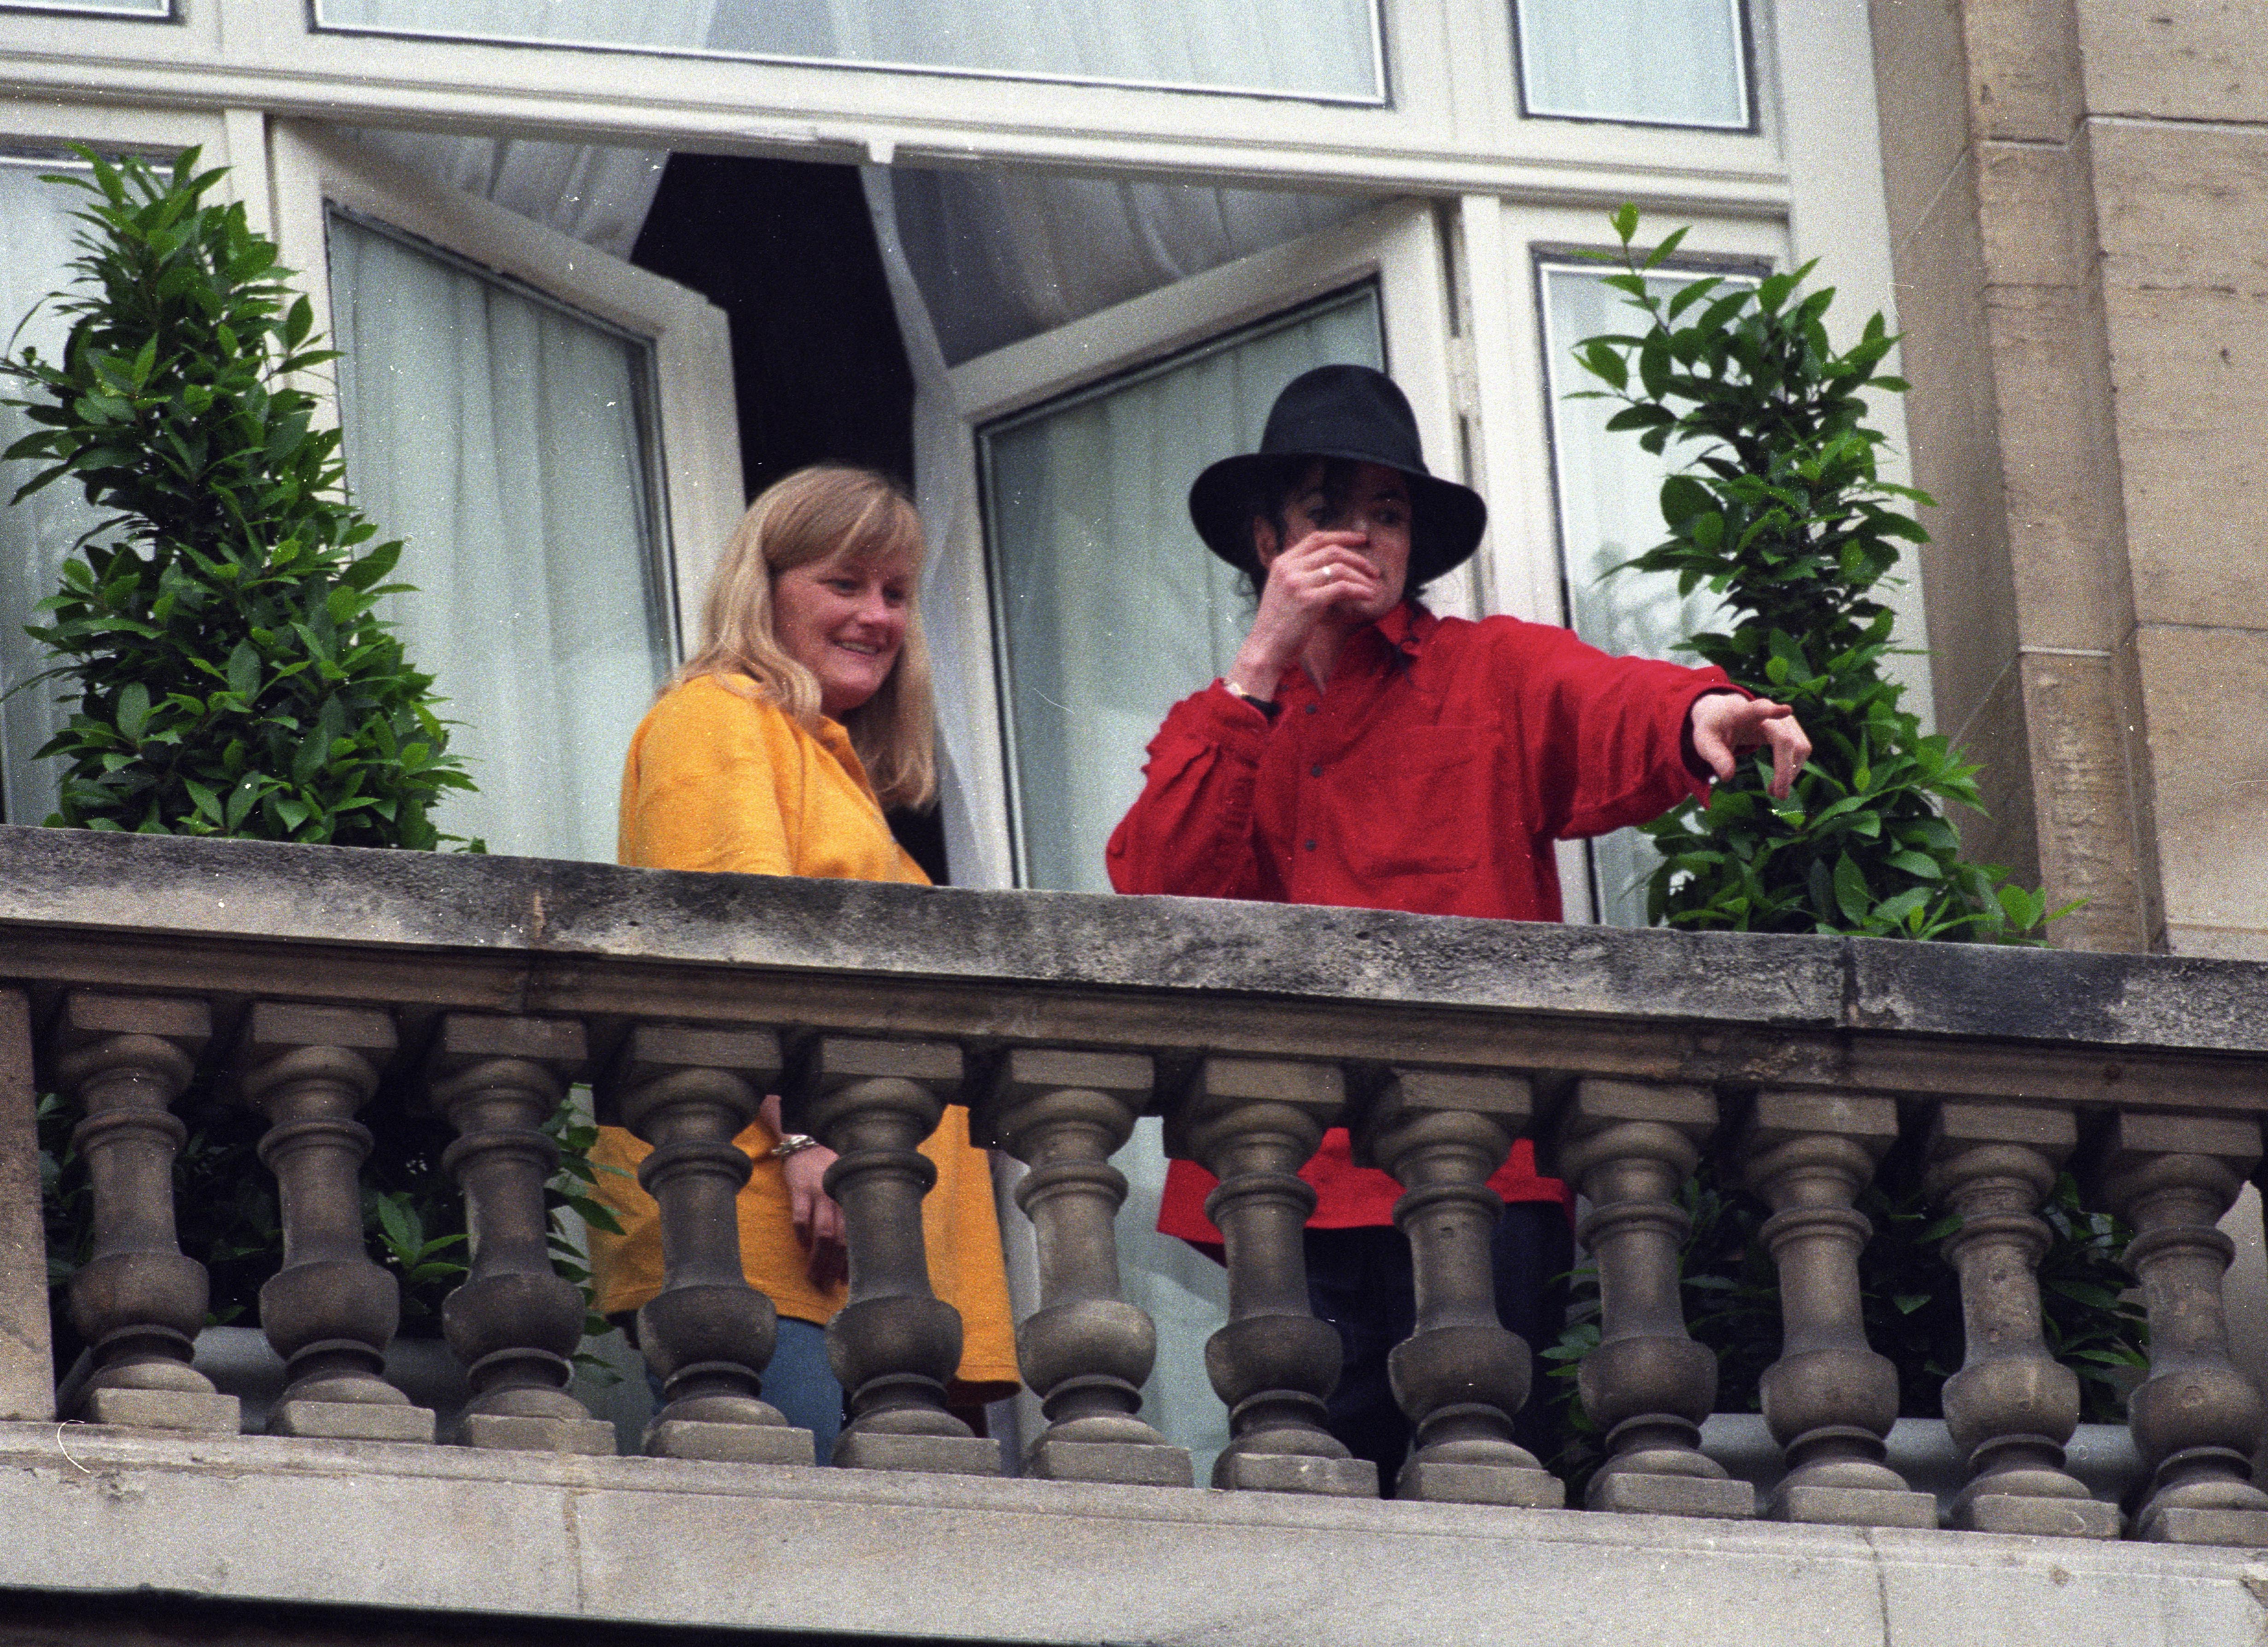 Debbie Rowe and Michael Jackson in 1997 in Paris, France | Source: Getty Images